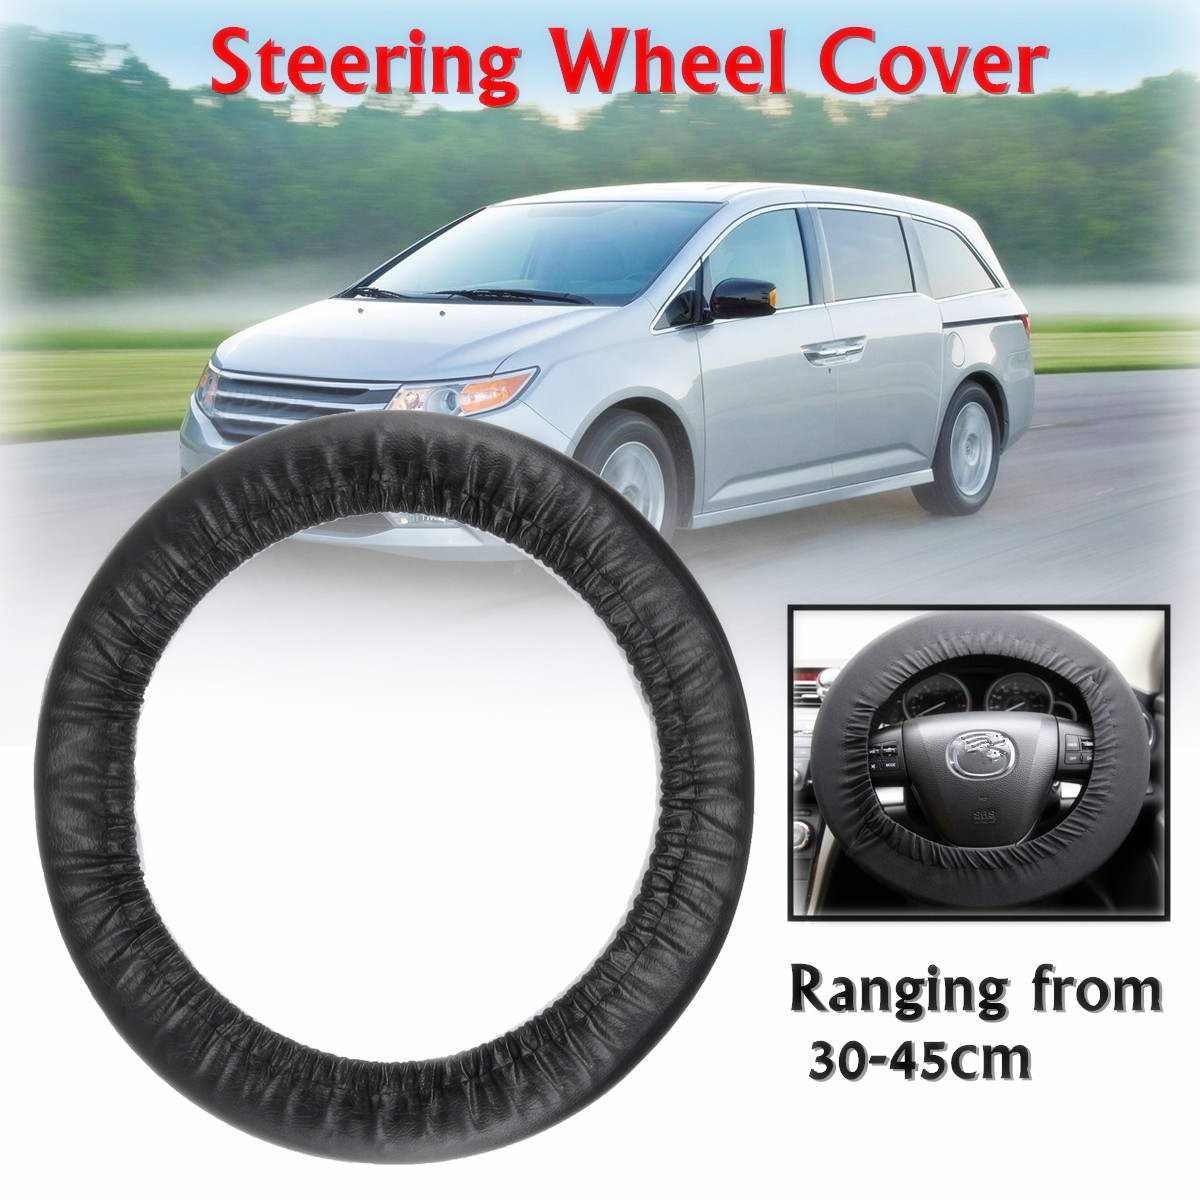 30-to-45cm-Universal-Steering-Wheel-Soft-Grip-Car-Cover-Glove-Protect-Black-1426619